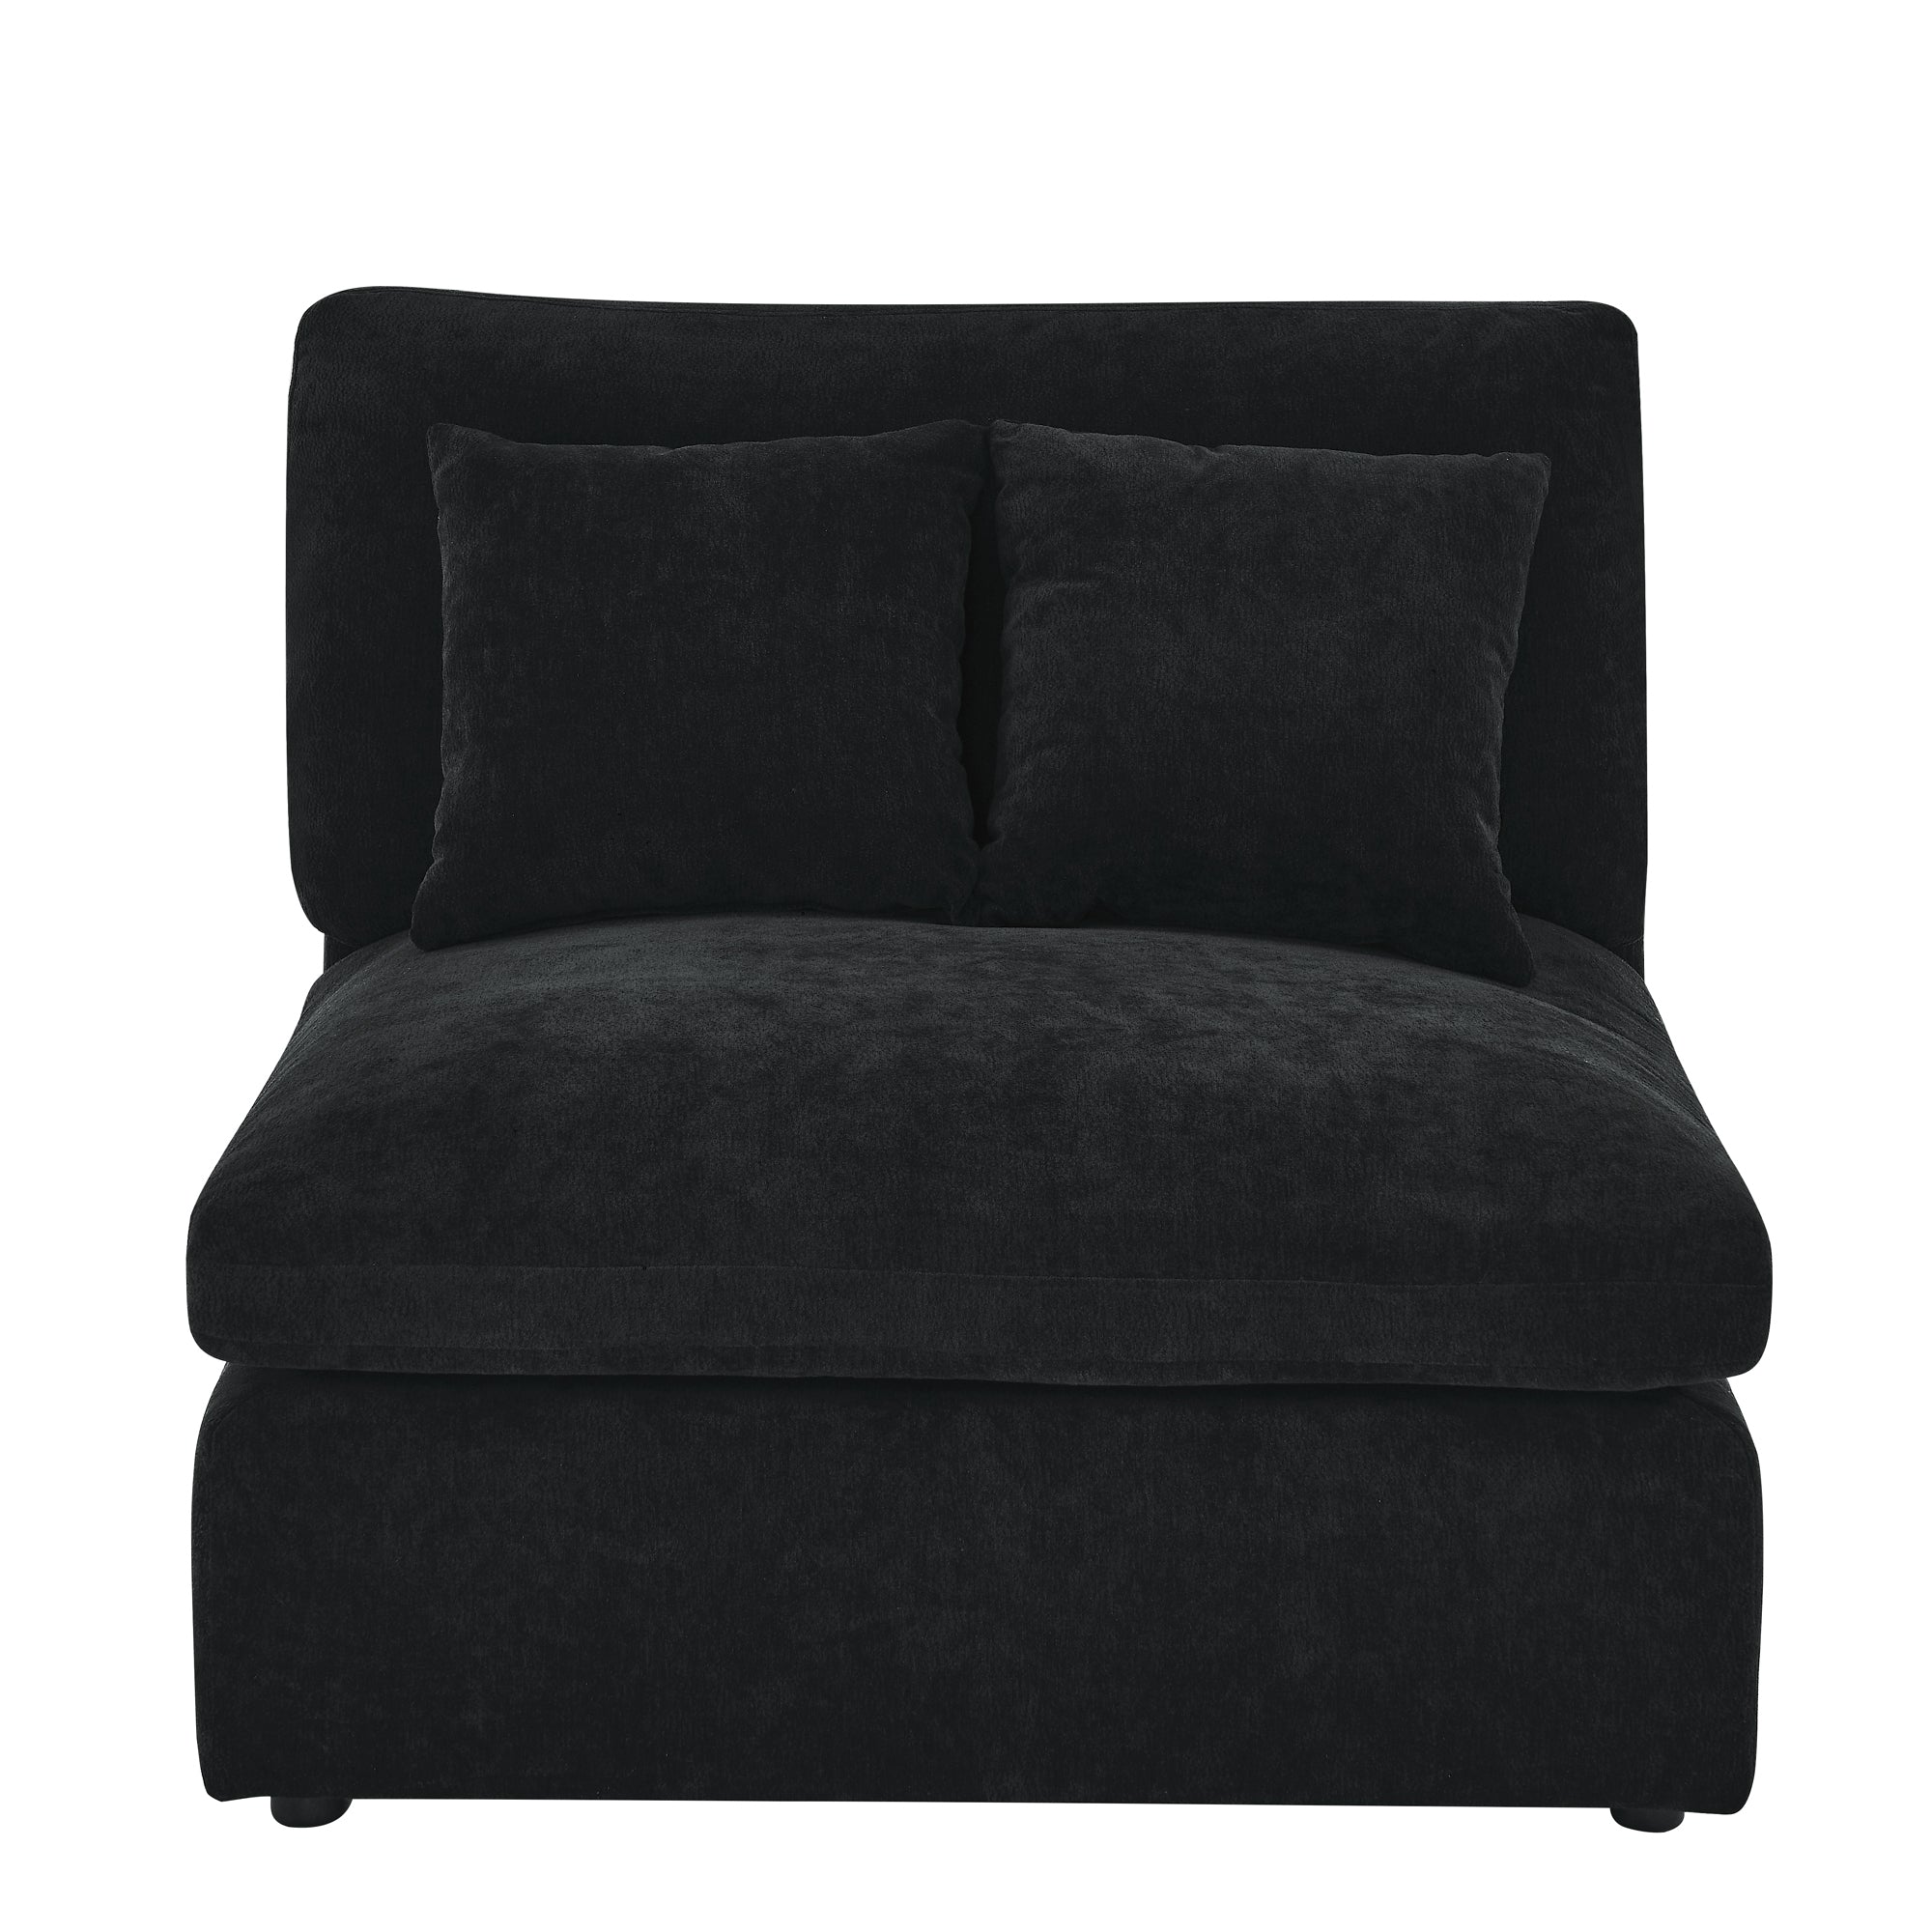 6 Seats Modular L Shaped Sectional Sofa with black-chenille-wood-primary living